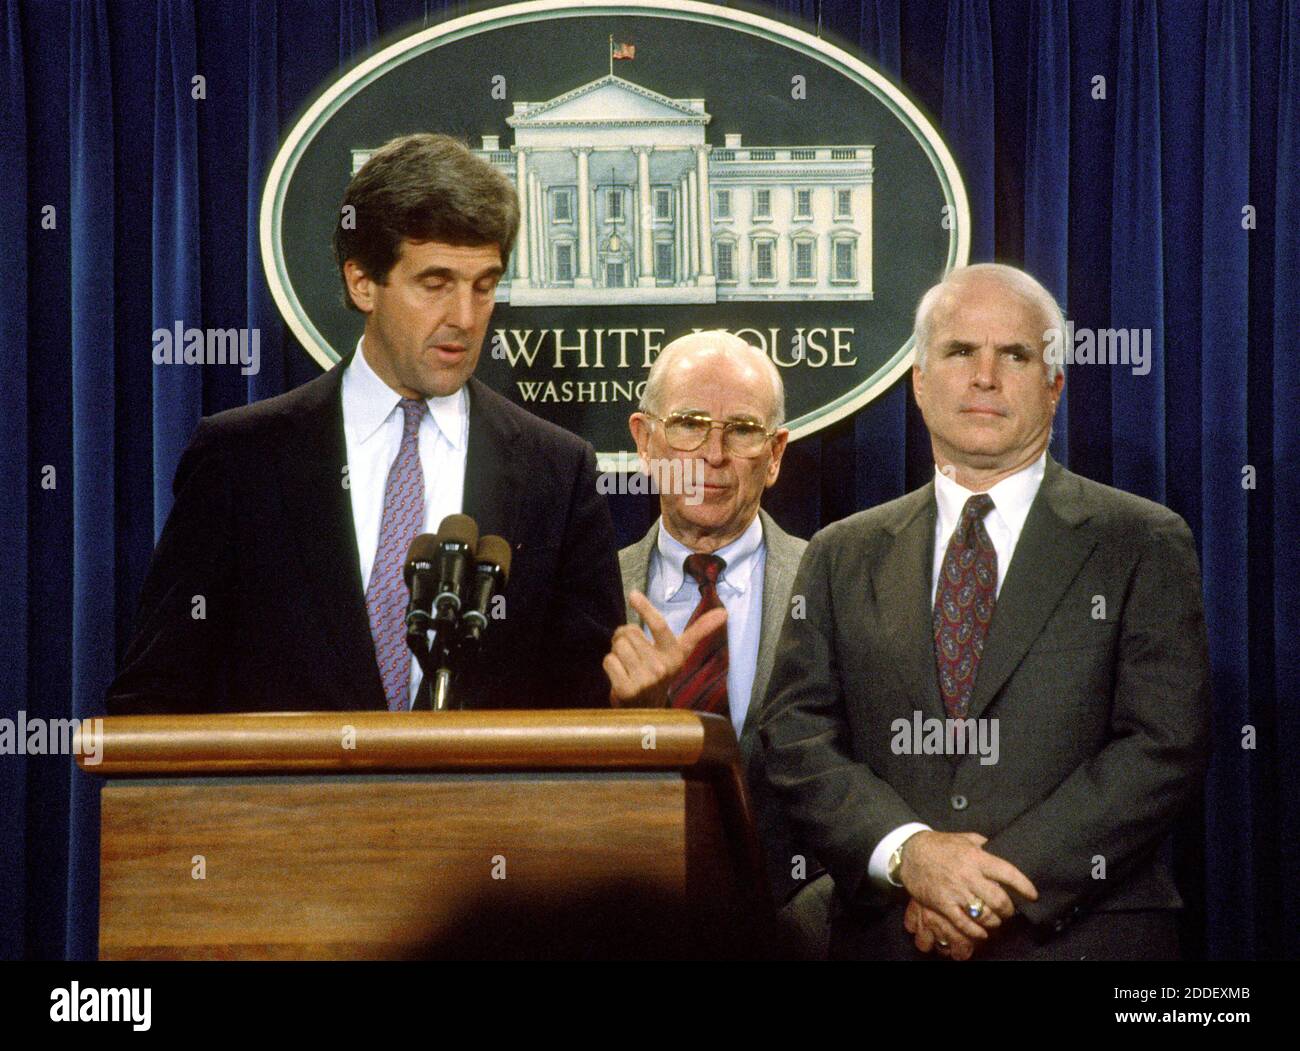 Washington, DC - (FILE) -- United States Senator John F. Kerry (Democrat of Massachusetts), left, retired United States Army General John Vessey, former chairman of the Joint Chiefs of Staff, and Special Emissary to Vietnam for P.O.W./M.I.A. affairs, center, and United States Senator John McCain (Republican of Arizona), right, meet reporters in the White House Press Briefing Room after United States President George H.W. Bush announced the Government of Vietnam had agreed to make available all information including photographs, artifacts, and military documents on United States prisoners of wa Stock Photo